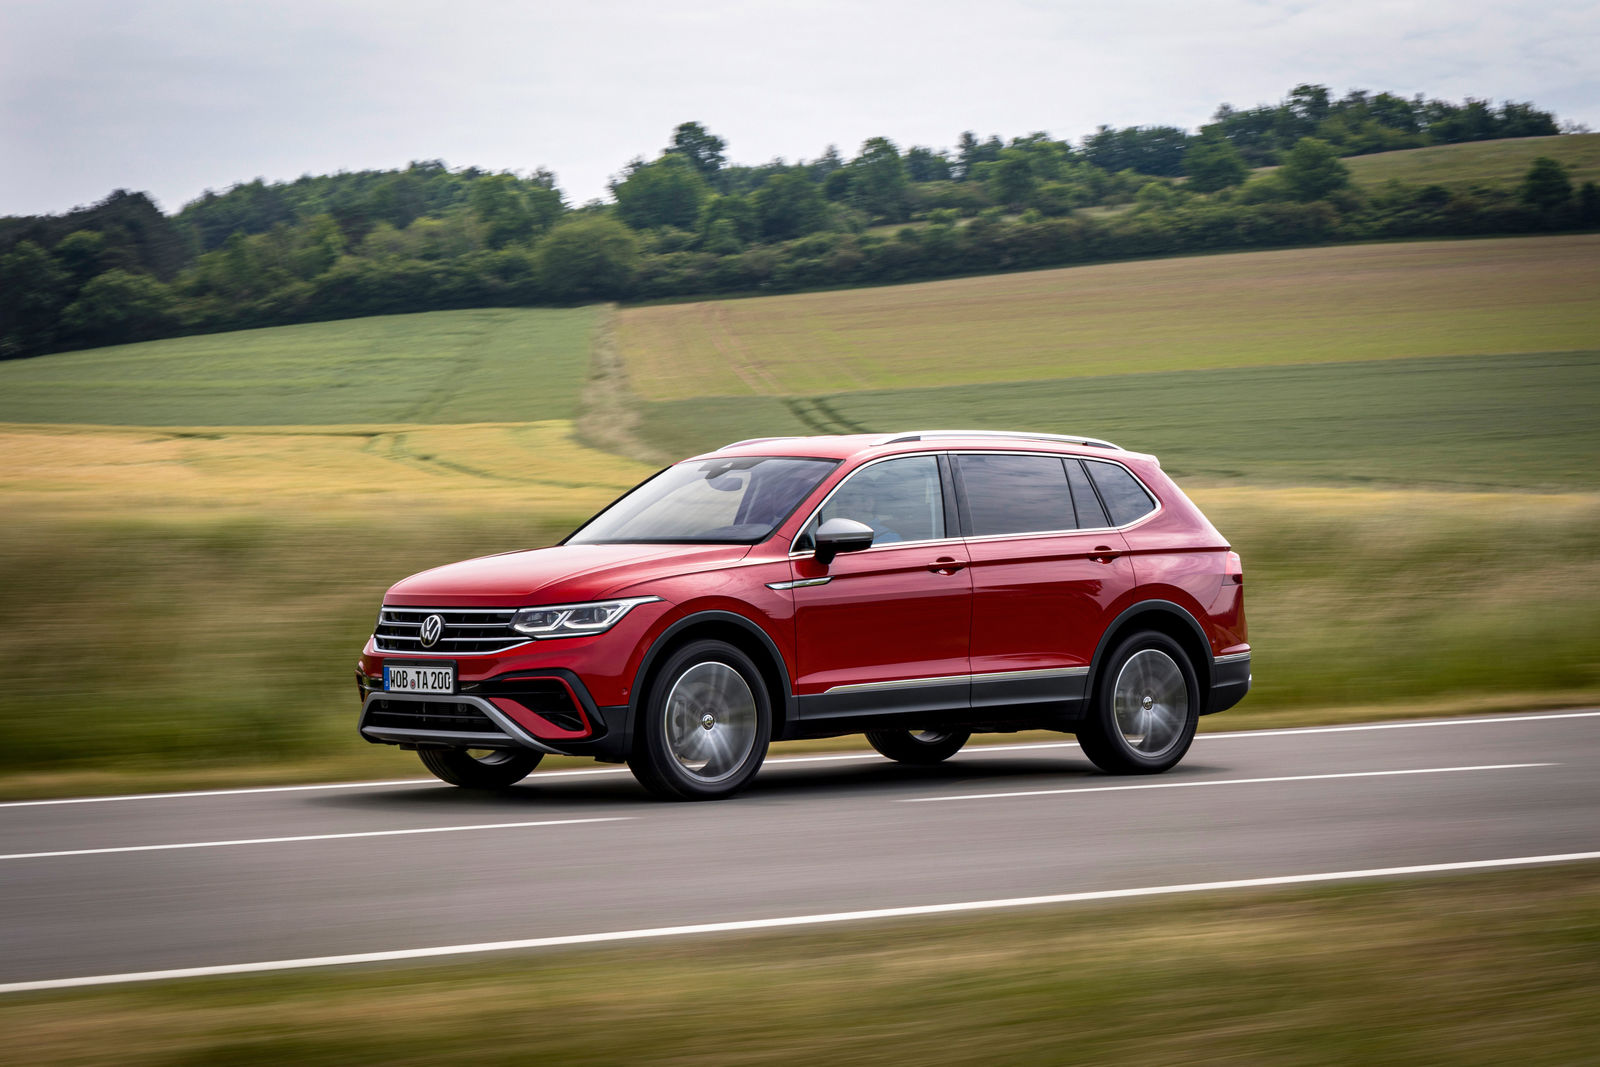 The new Tiguan Allspace - Test drives